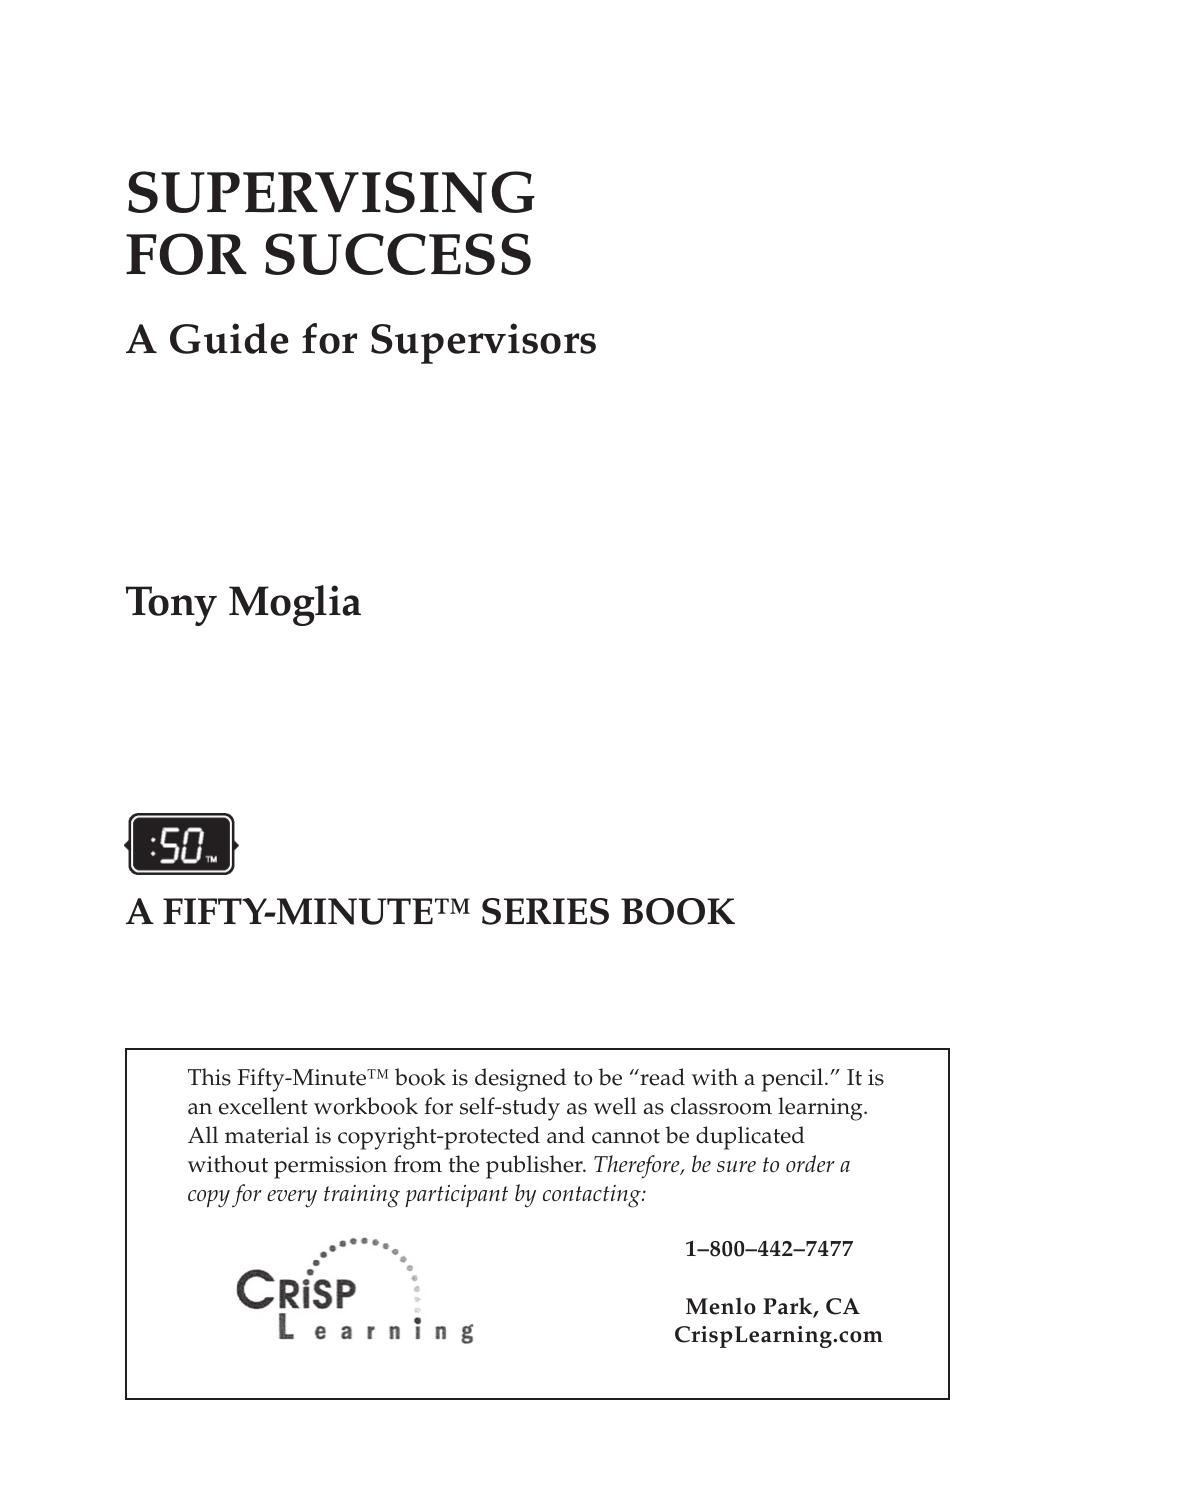 Supervising for Success : A Guide for Supervisors by Tony Moglia